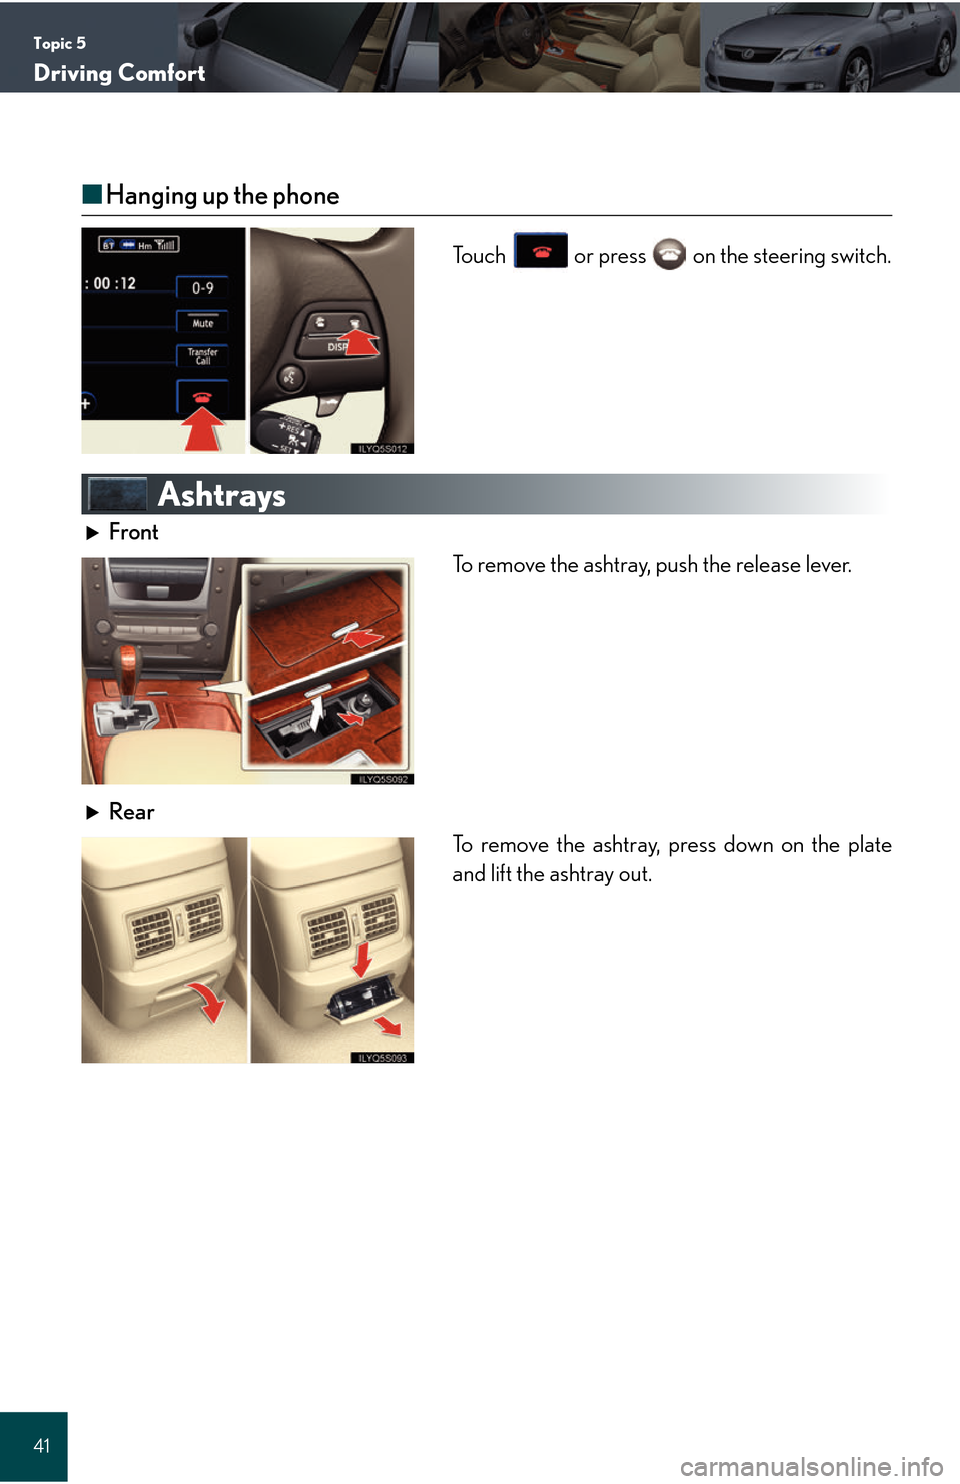 Lexus GS450h 2008  Scheduled Maintenace Guide / LEXUS 2008 GS450H QUICK GUIDE  (OM30B13U) Service Manual Topic 5
Driving Comfort
41
■Hanging up the phone
Touch   or press   on the steering switch.
Ashtrays
Front
To remove the ashtray, push the release lever.
Rear To remove the ashtray, press down on th